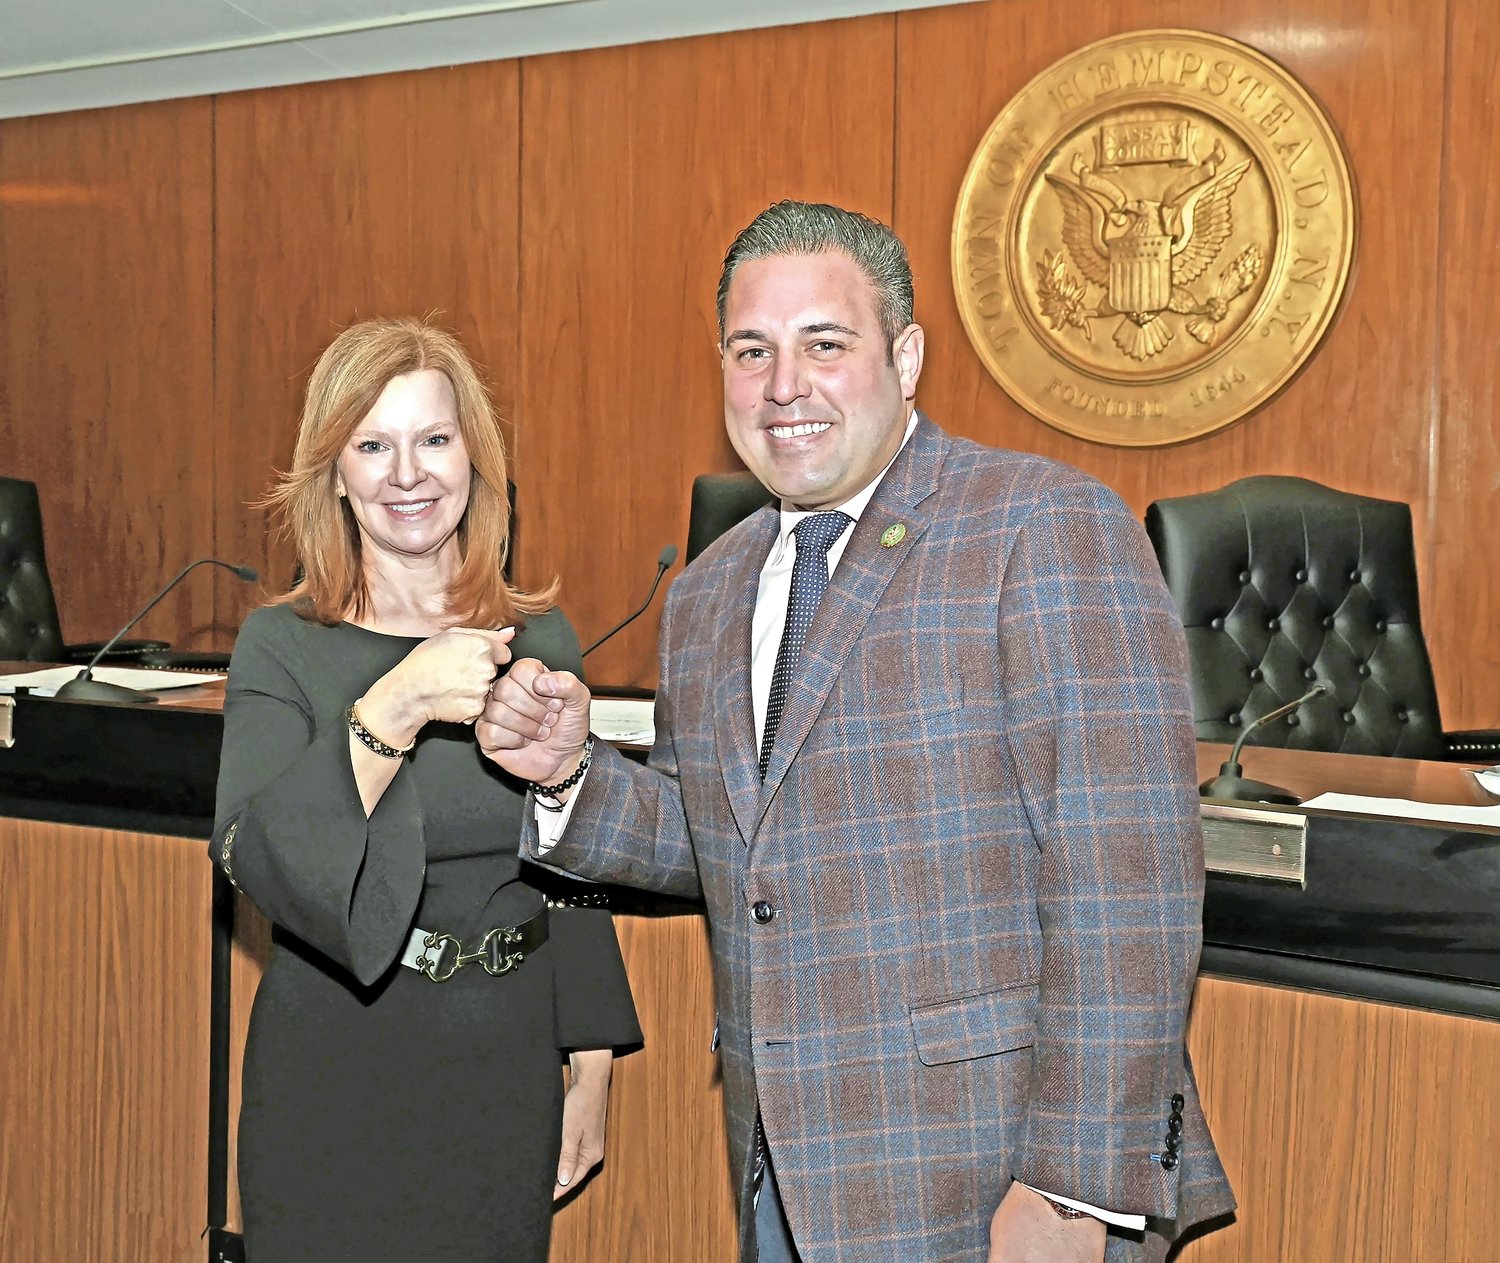 Laura Ryder, left, will be taking over the duties of Anthony D’Esposito, right, as she now represents the district that D’Esposito represented before he was elected into Congress.